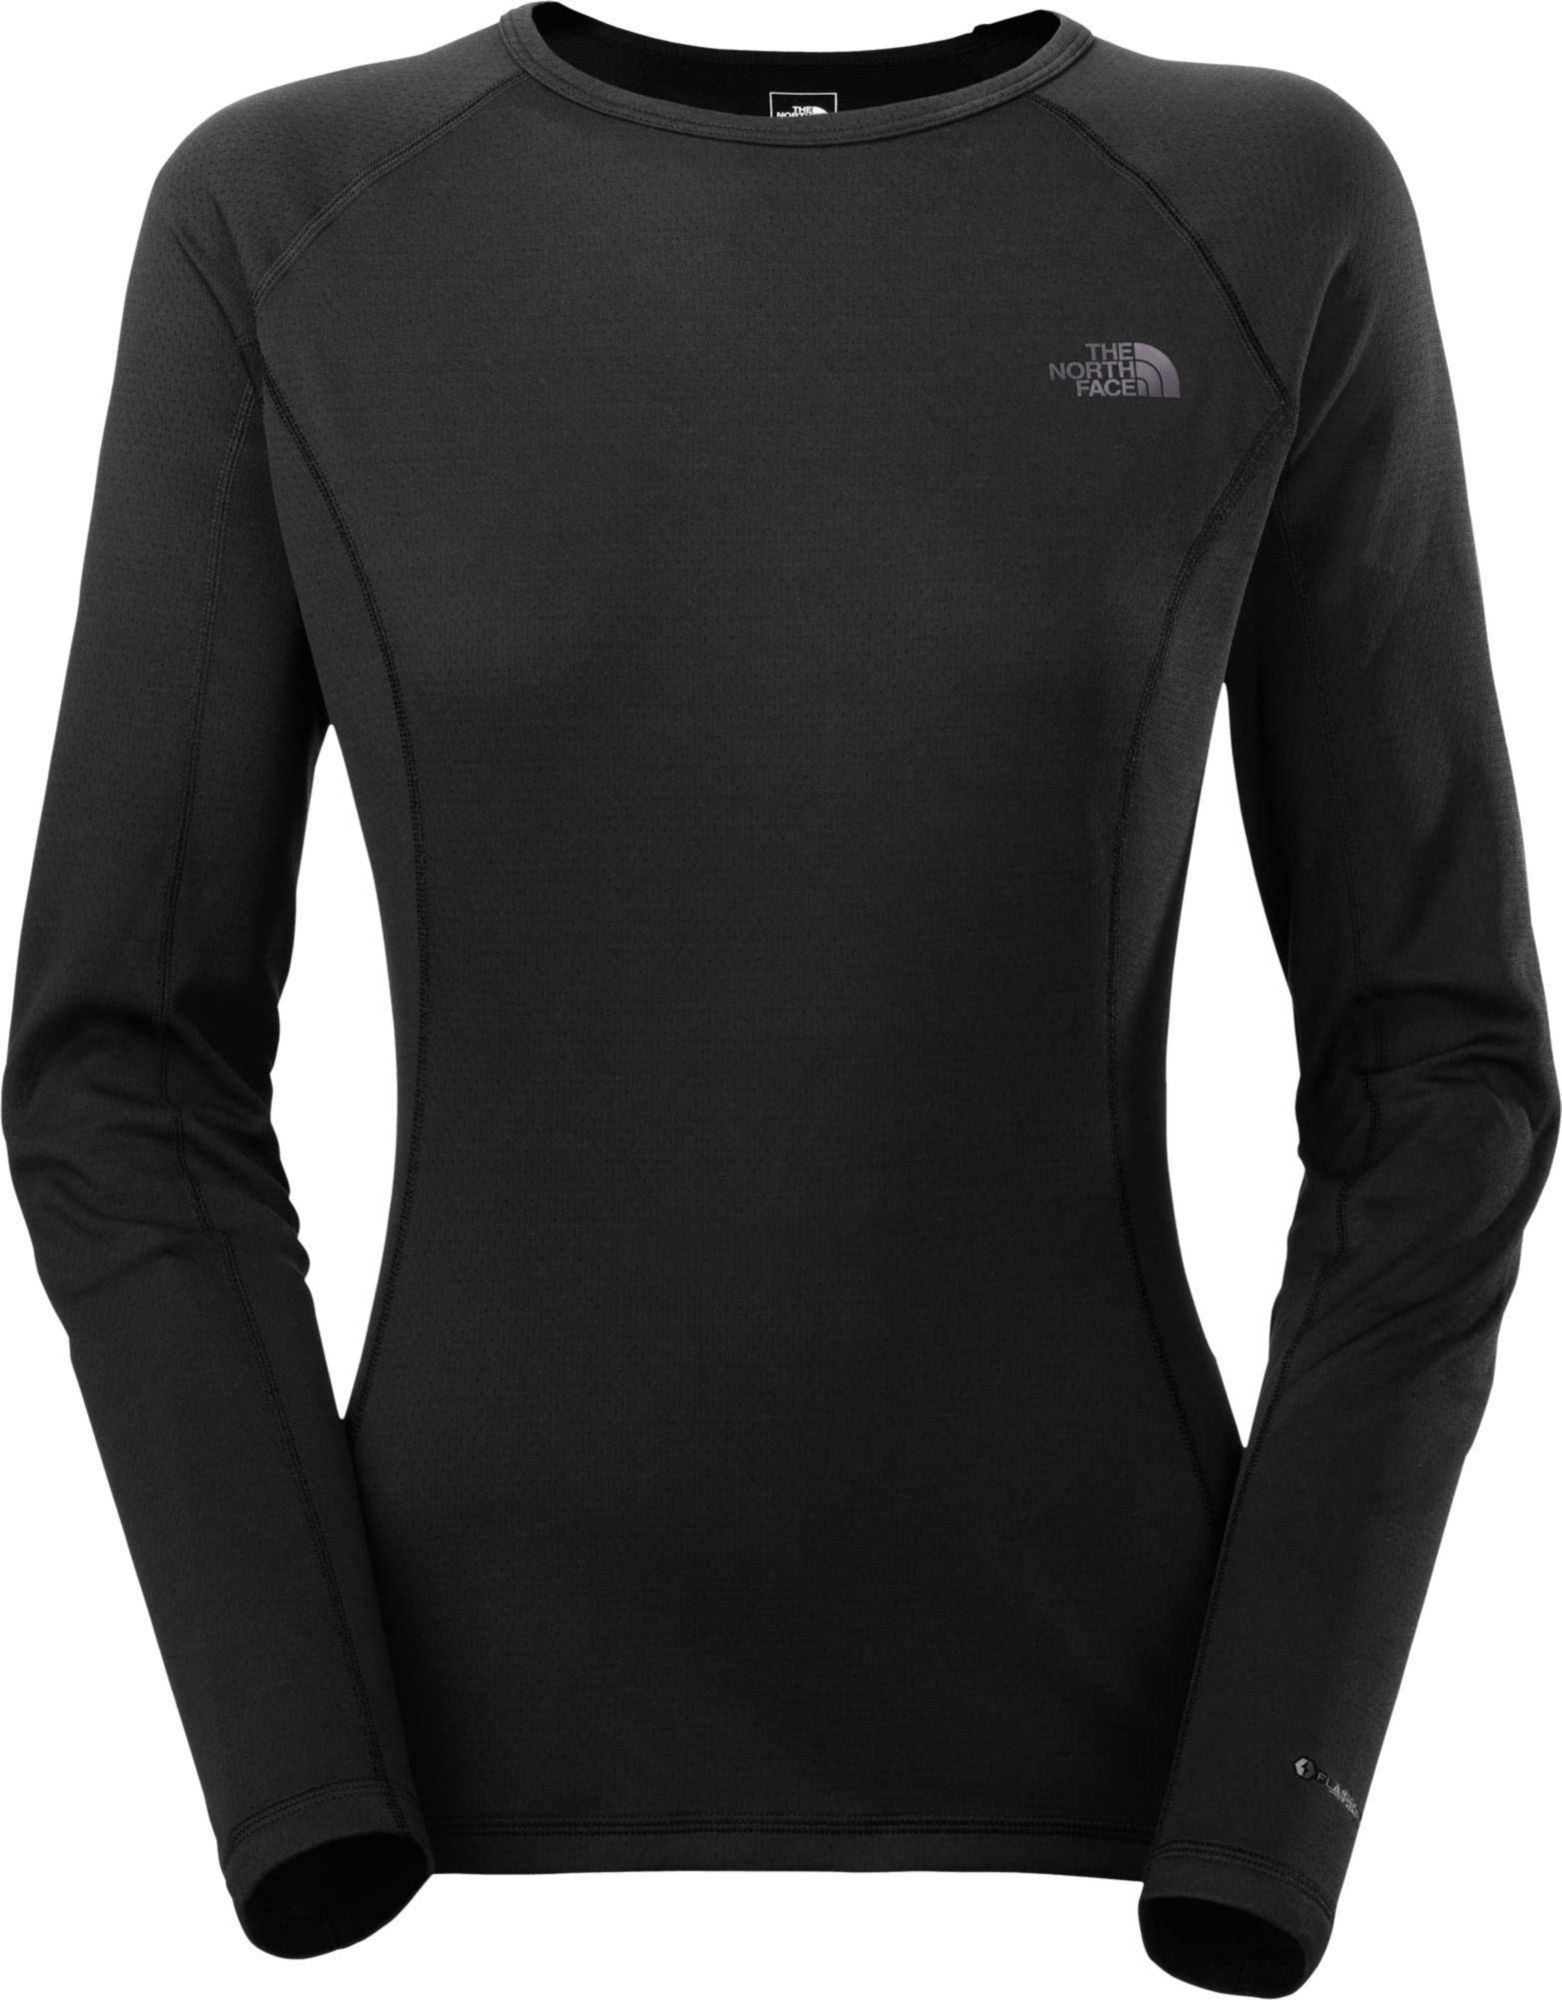 The North Face Women's Warm Baselayer 